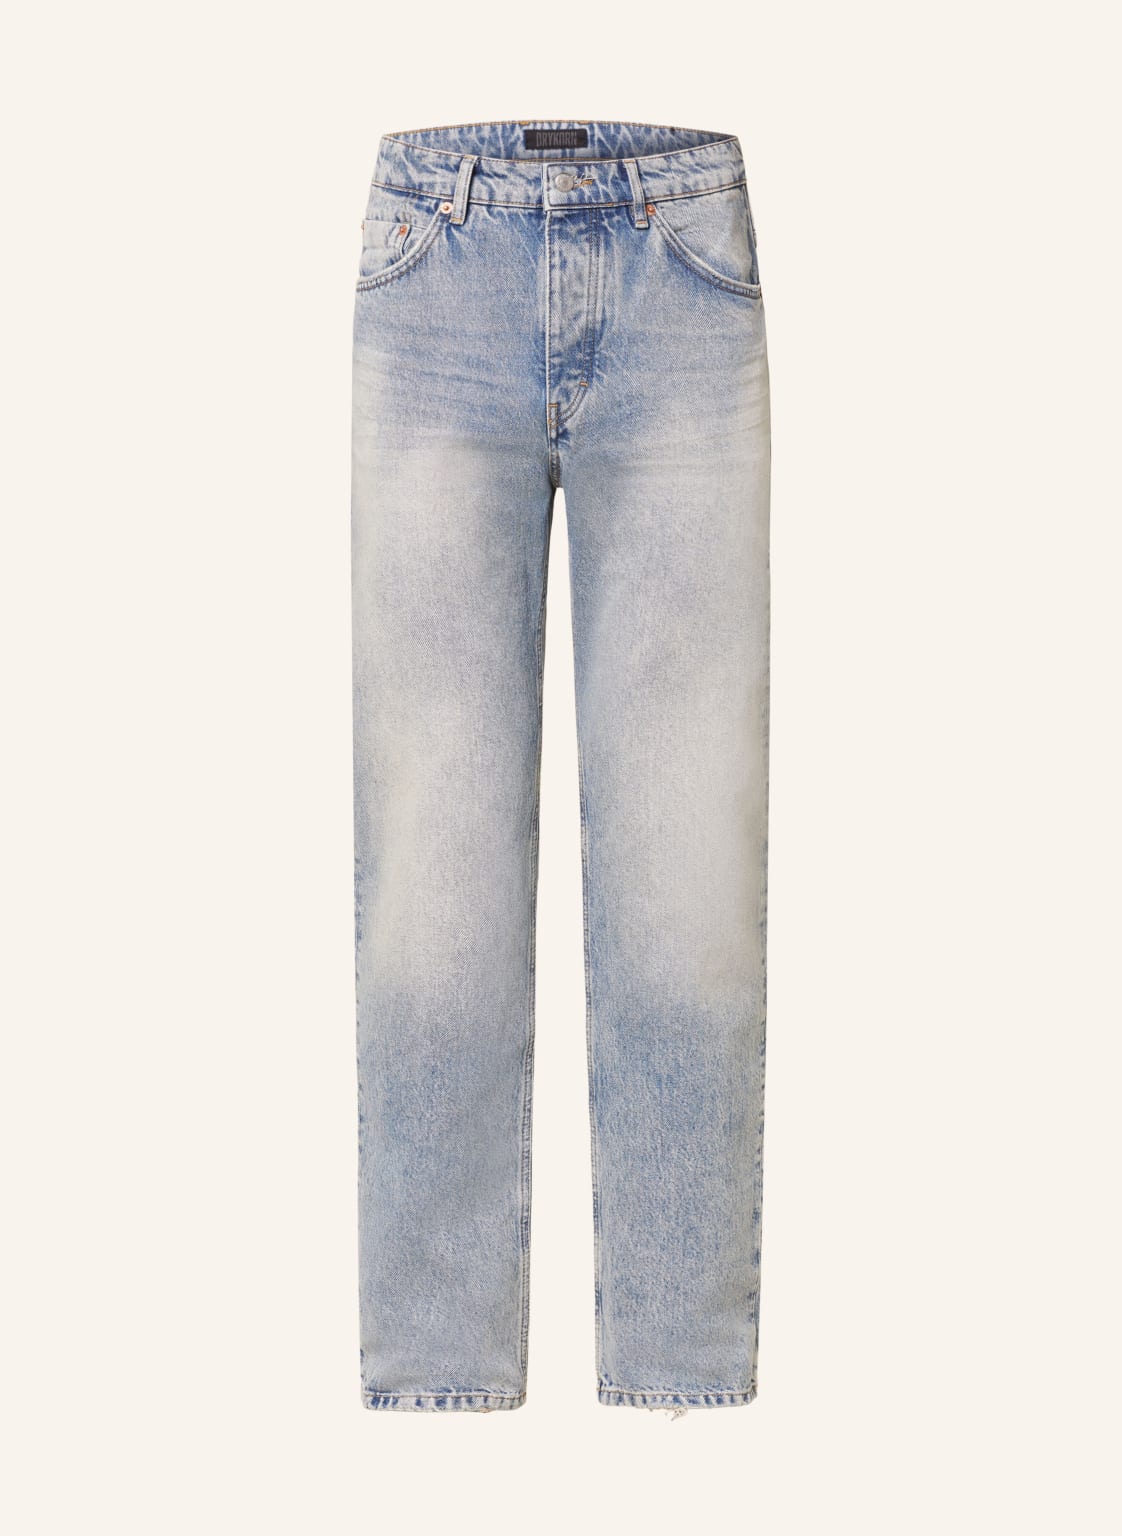 Drykorn Jeans Hight Relaxed Fit blau von drykorn